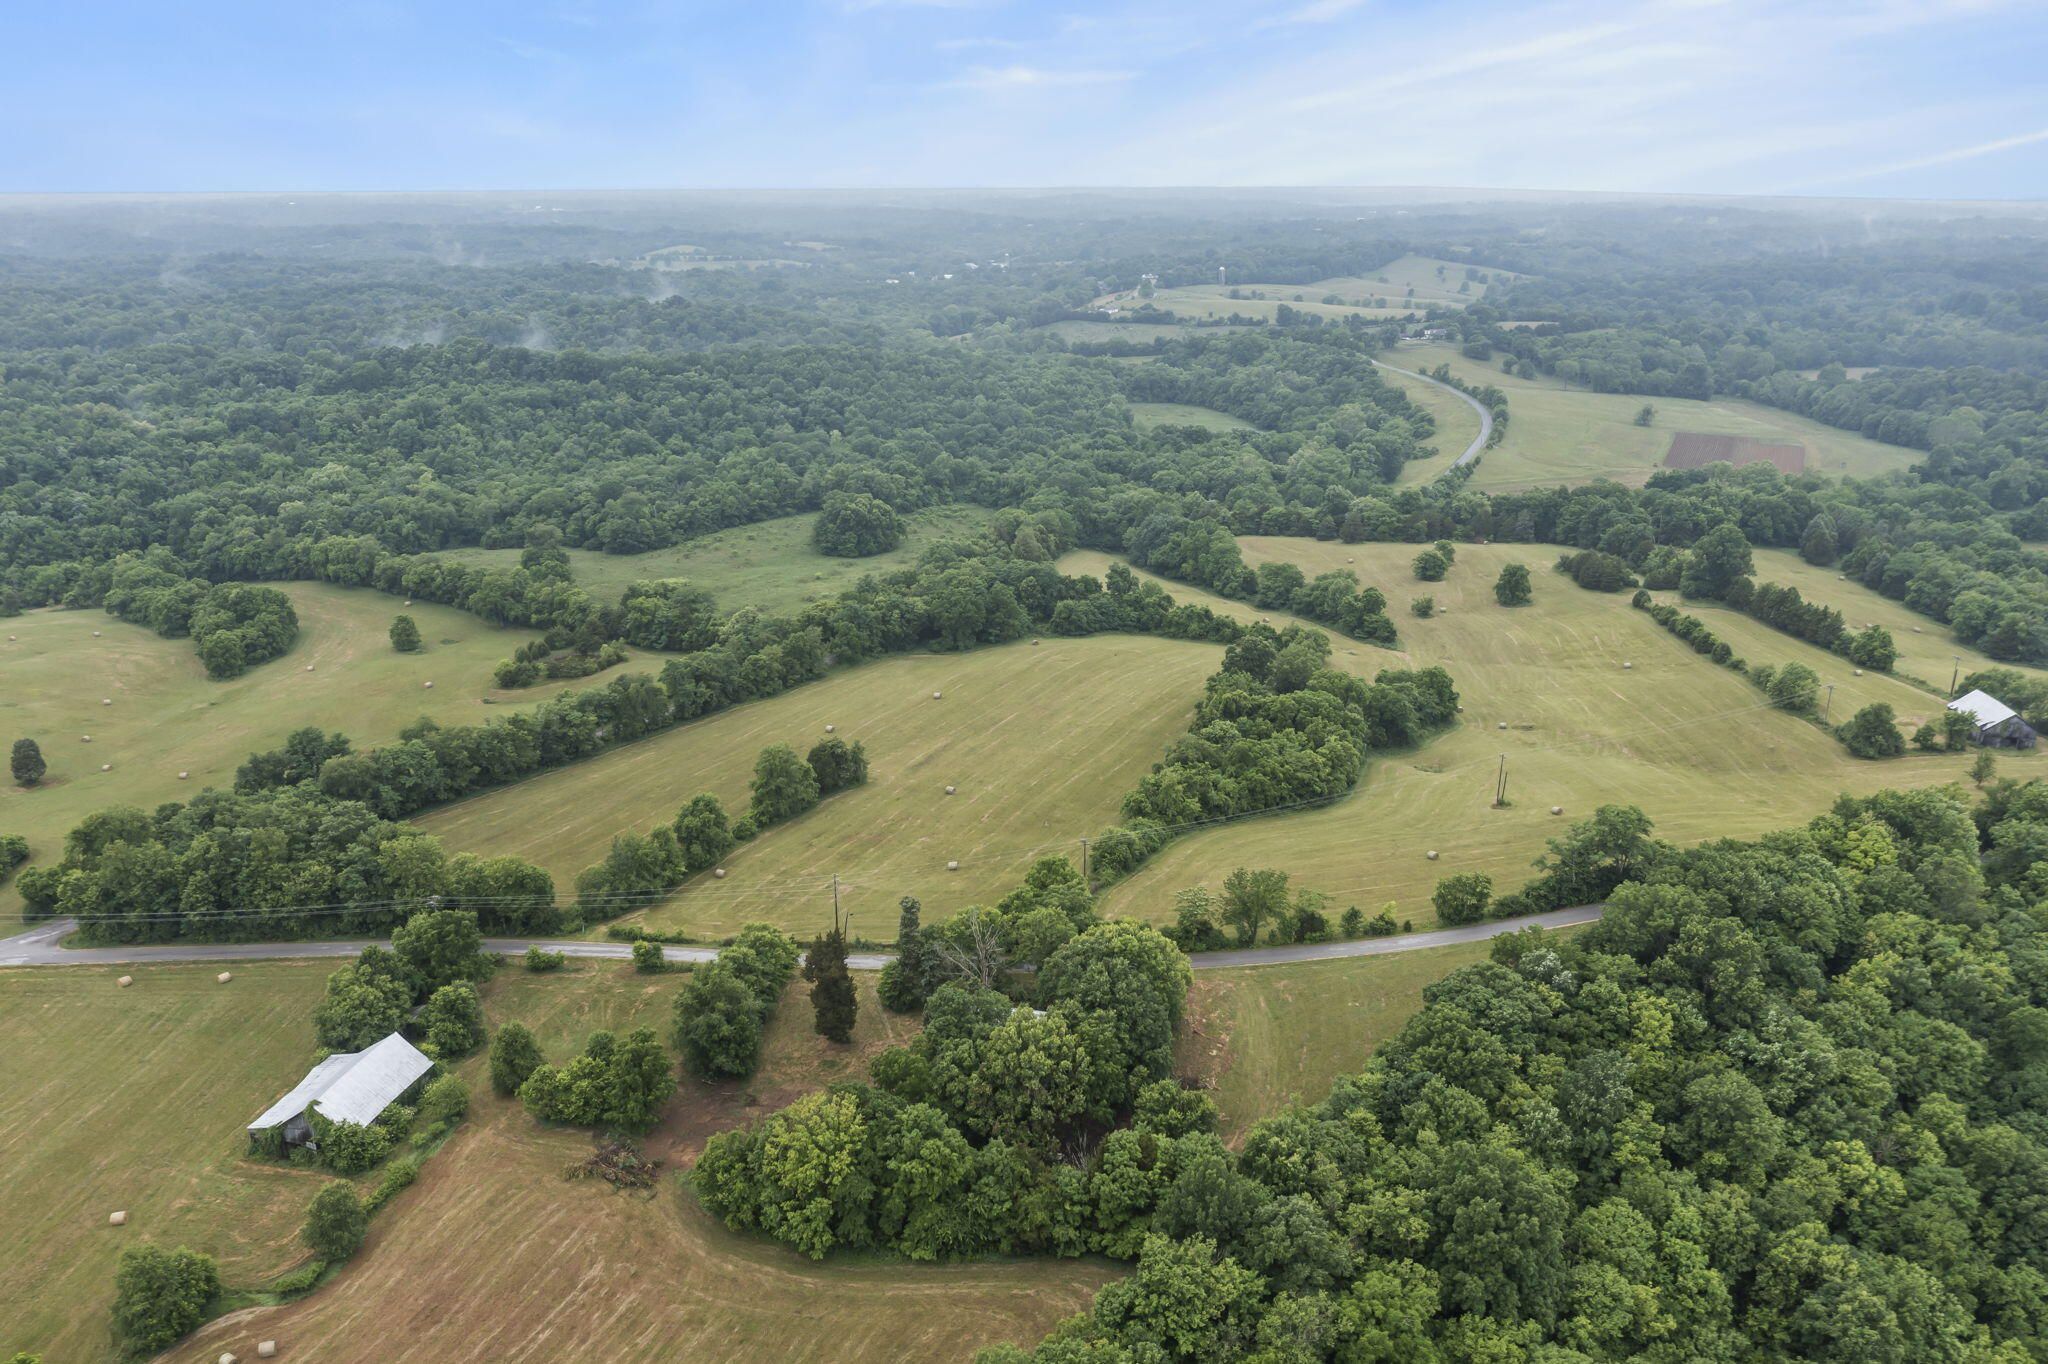 4 Crooked Creek Rd, Berry, KY 41003 | MLS# 23012710 | Trulia